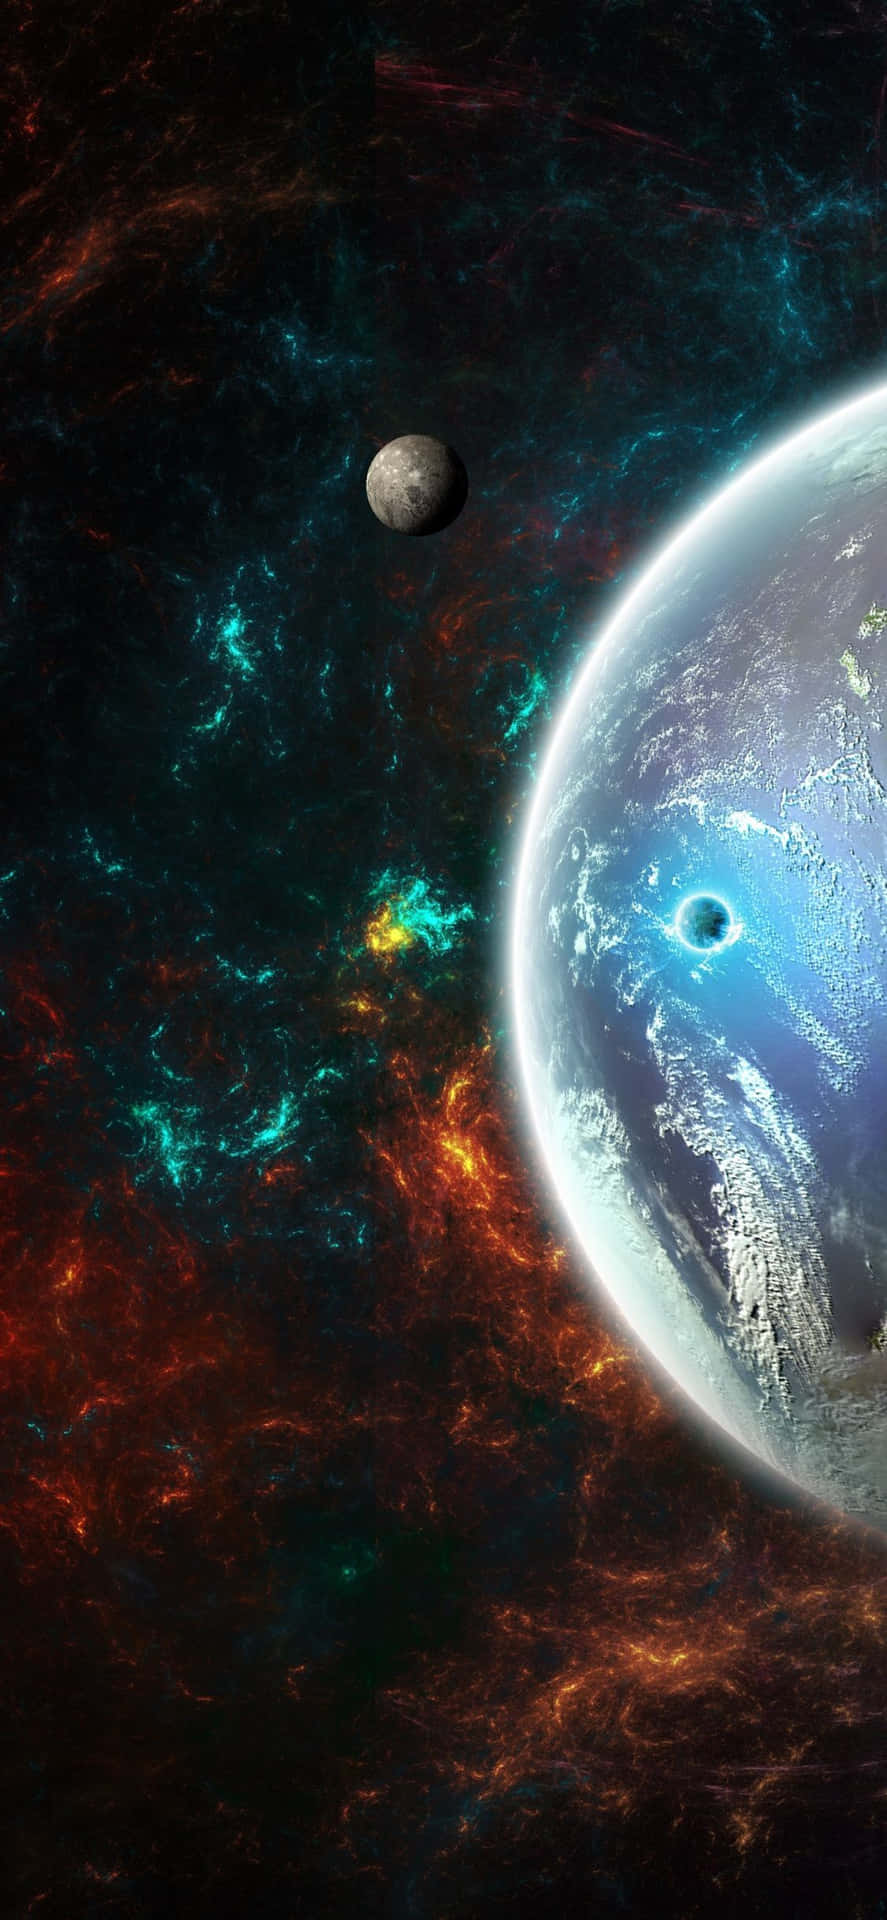 Glowing Planet In Universe iPhone Wallpaper